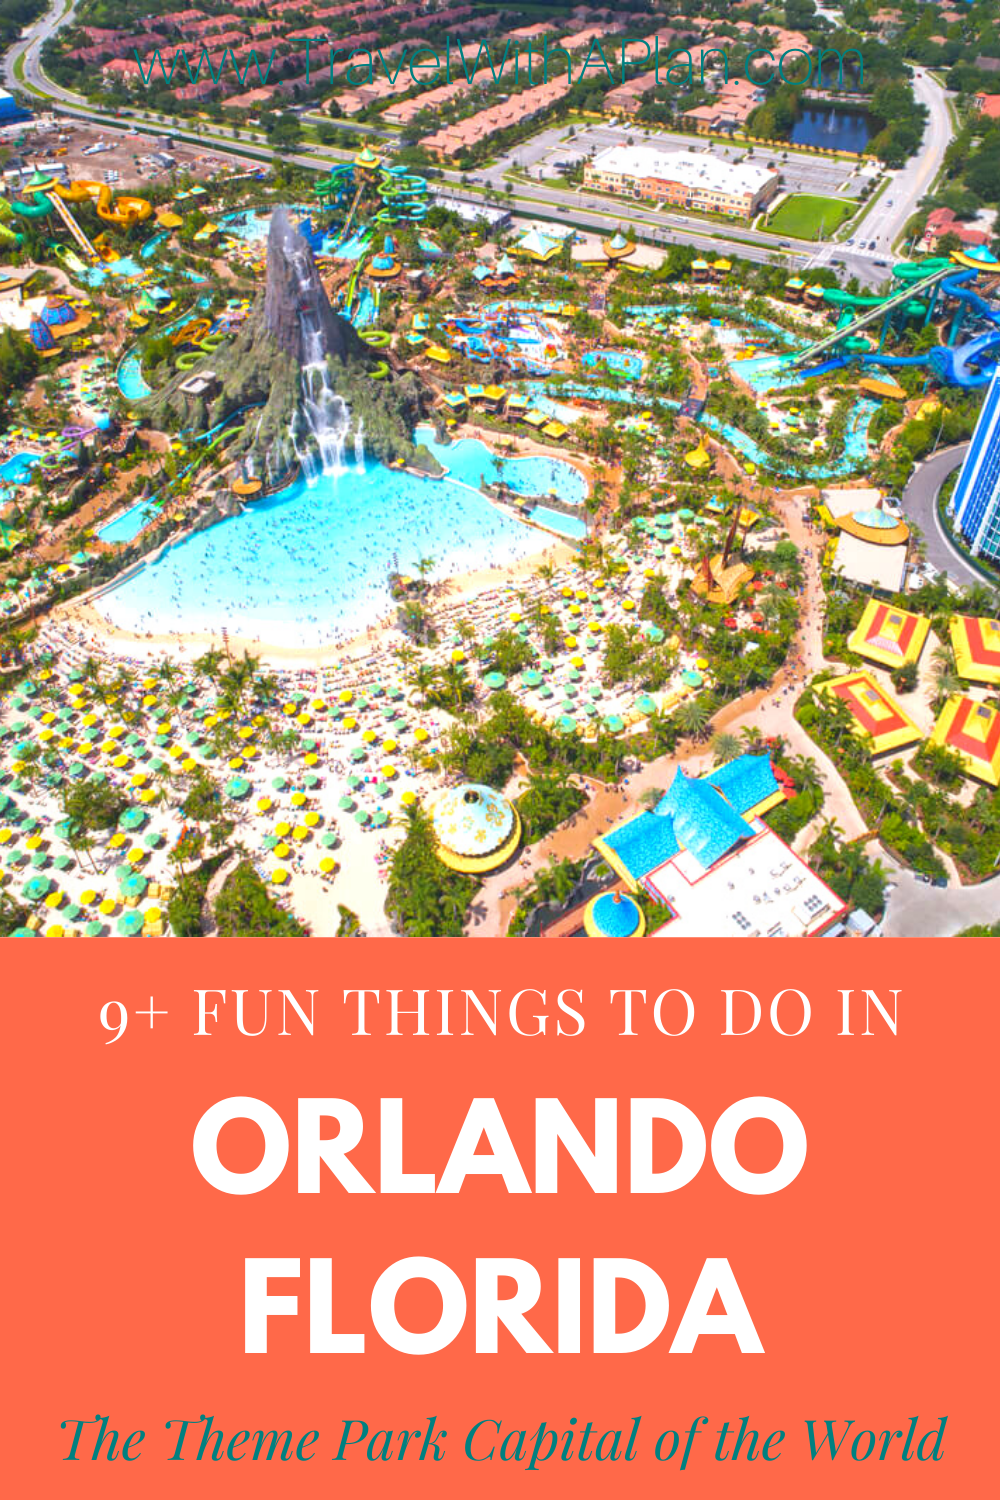 Check out 9+ fun things to do in Orlando that the whole family will love, from top US family travel blog, Travel With A Plan! #Orlandoattractions #thingstodoinOrlando #Floridavacation